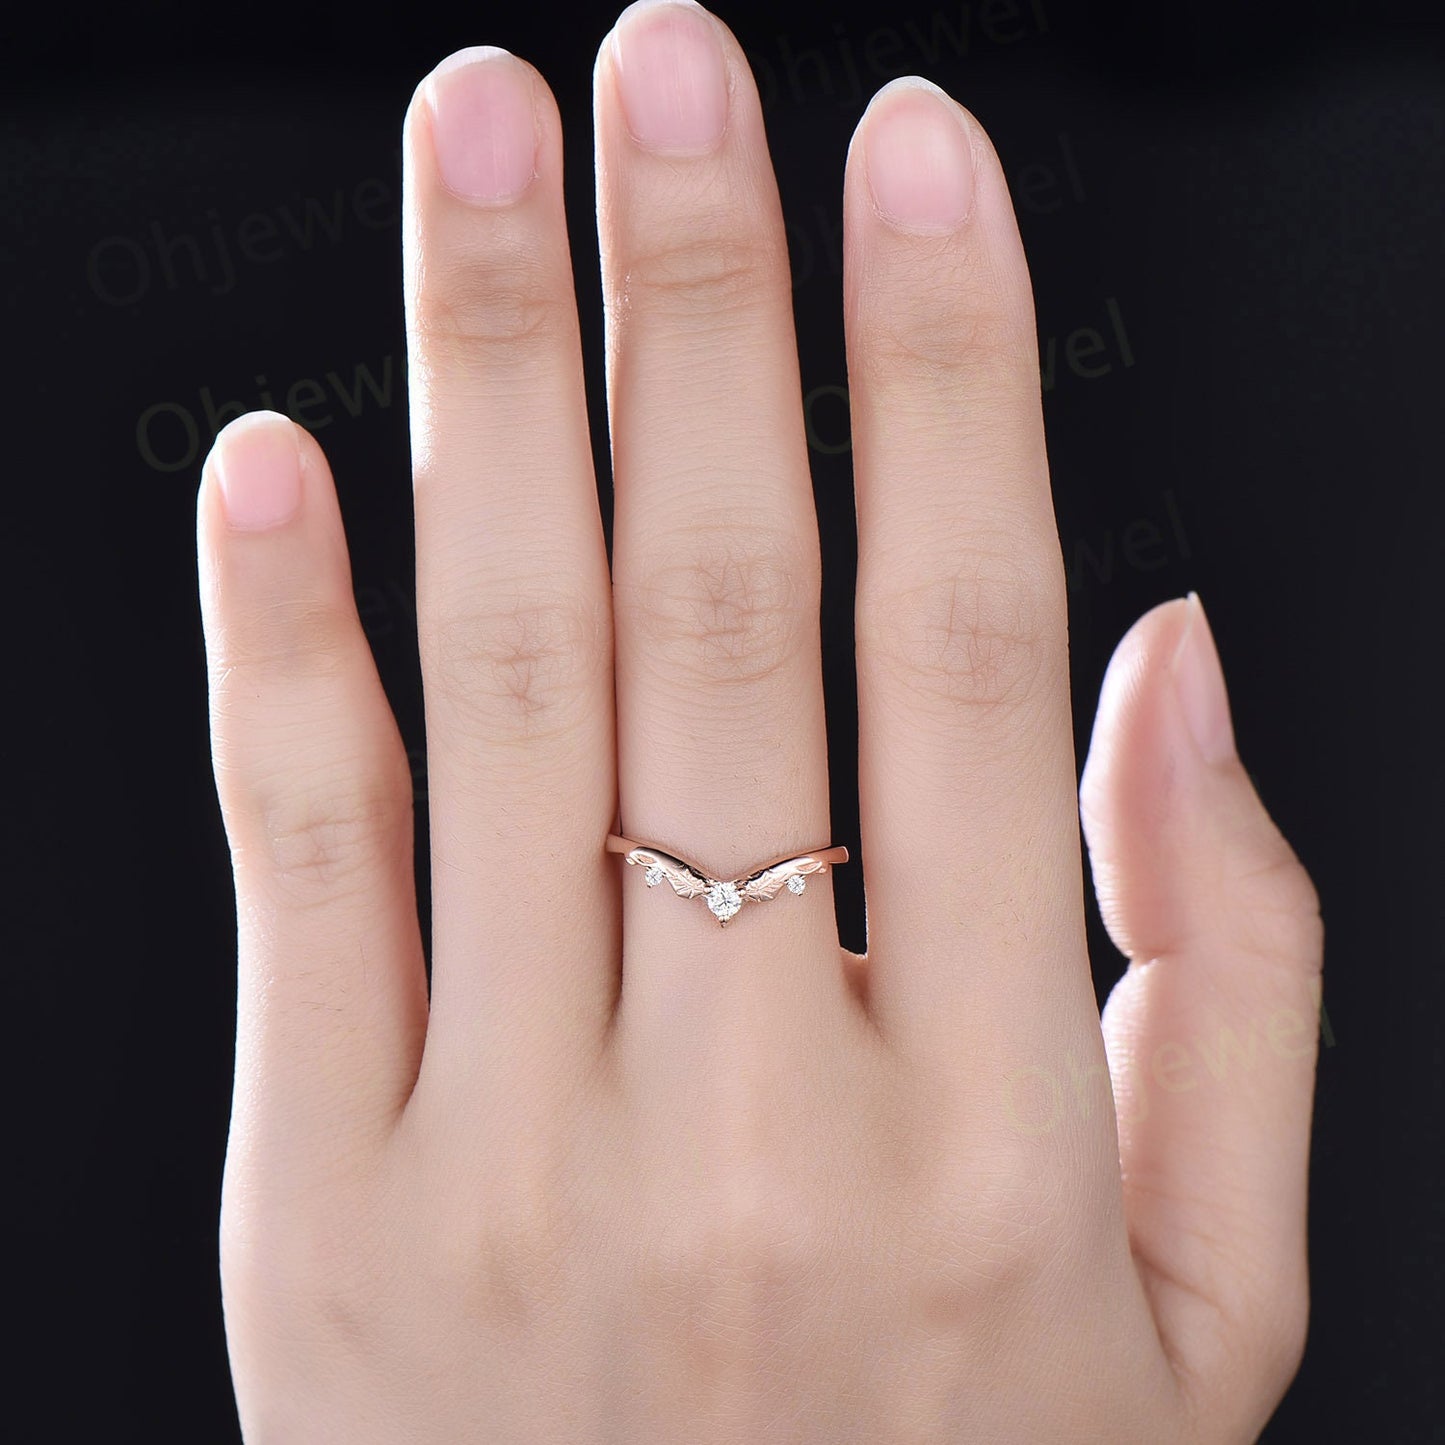 Vintage diamond wedding band 14k rose gold unique V shaped curved moissanite wedding ring band silver stacking anniversary ring women gift